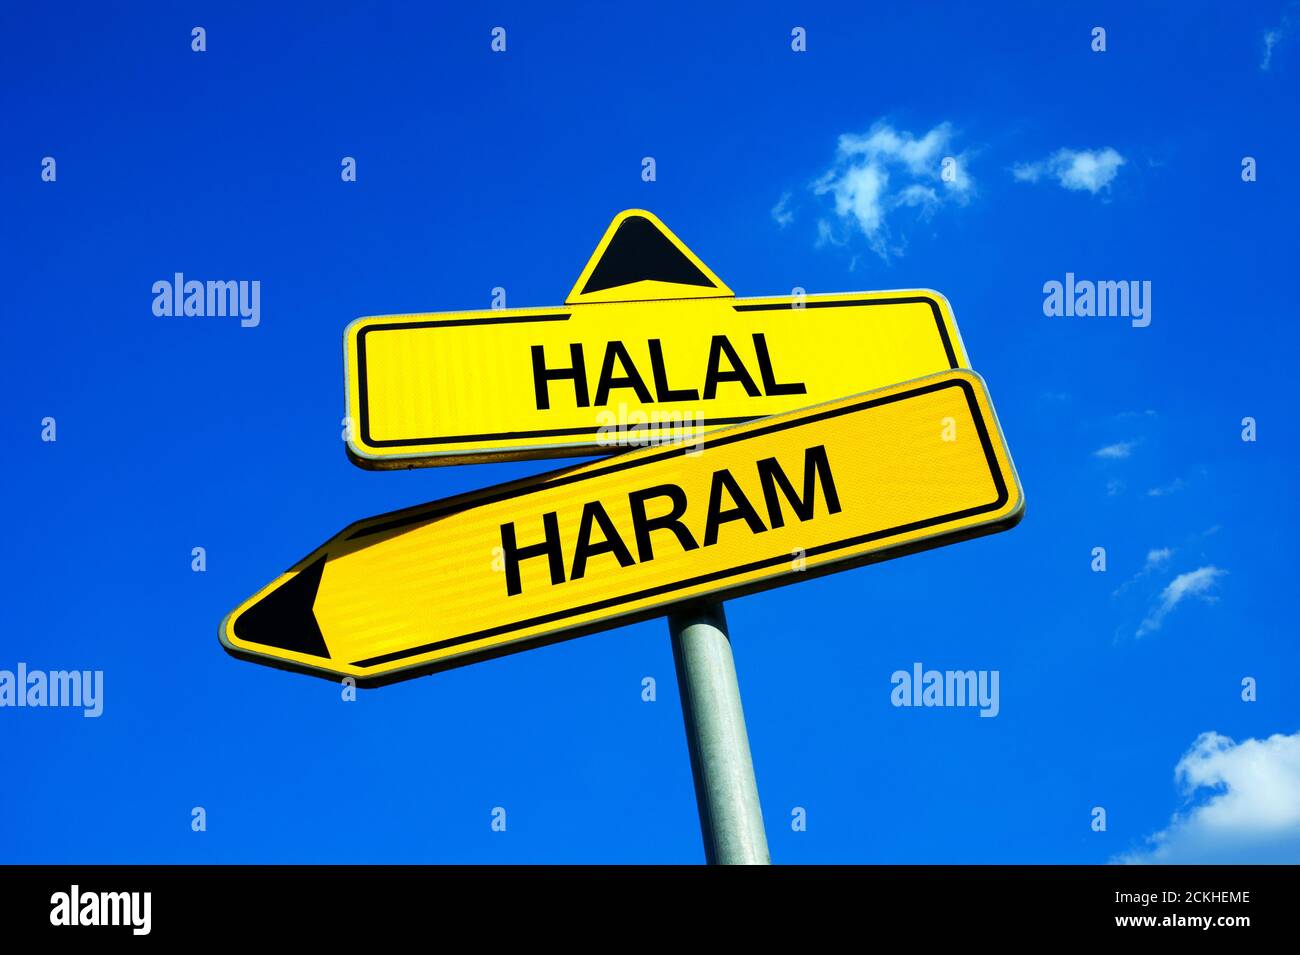 Halal or Haram - Traffic sign with two options - Muslims, Islam and allowed food vs forbidden dietary. Regulation based on principle of clean and uncl Stock Photo